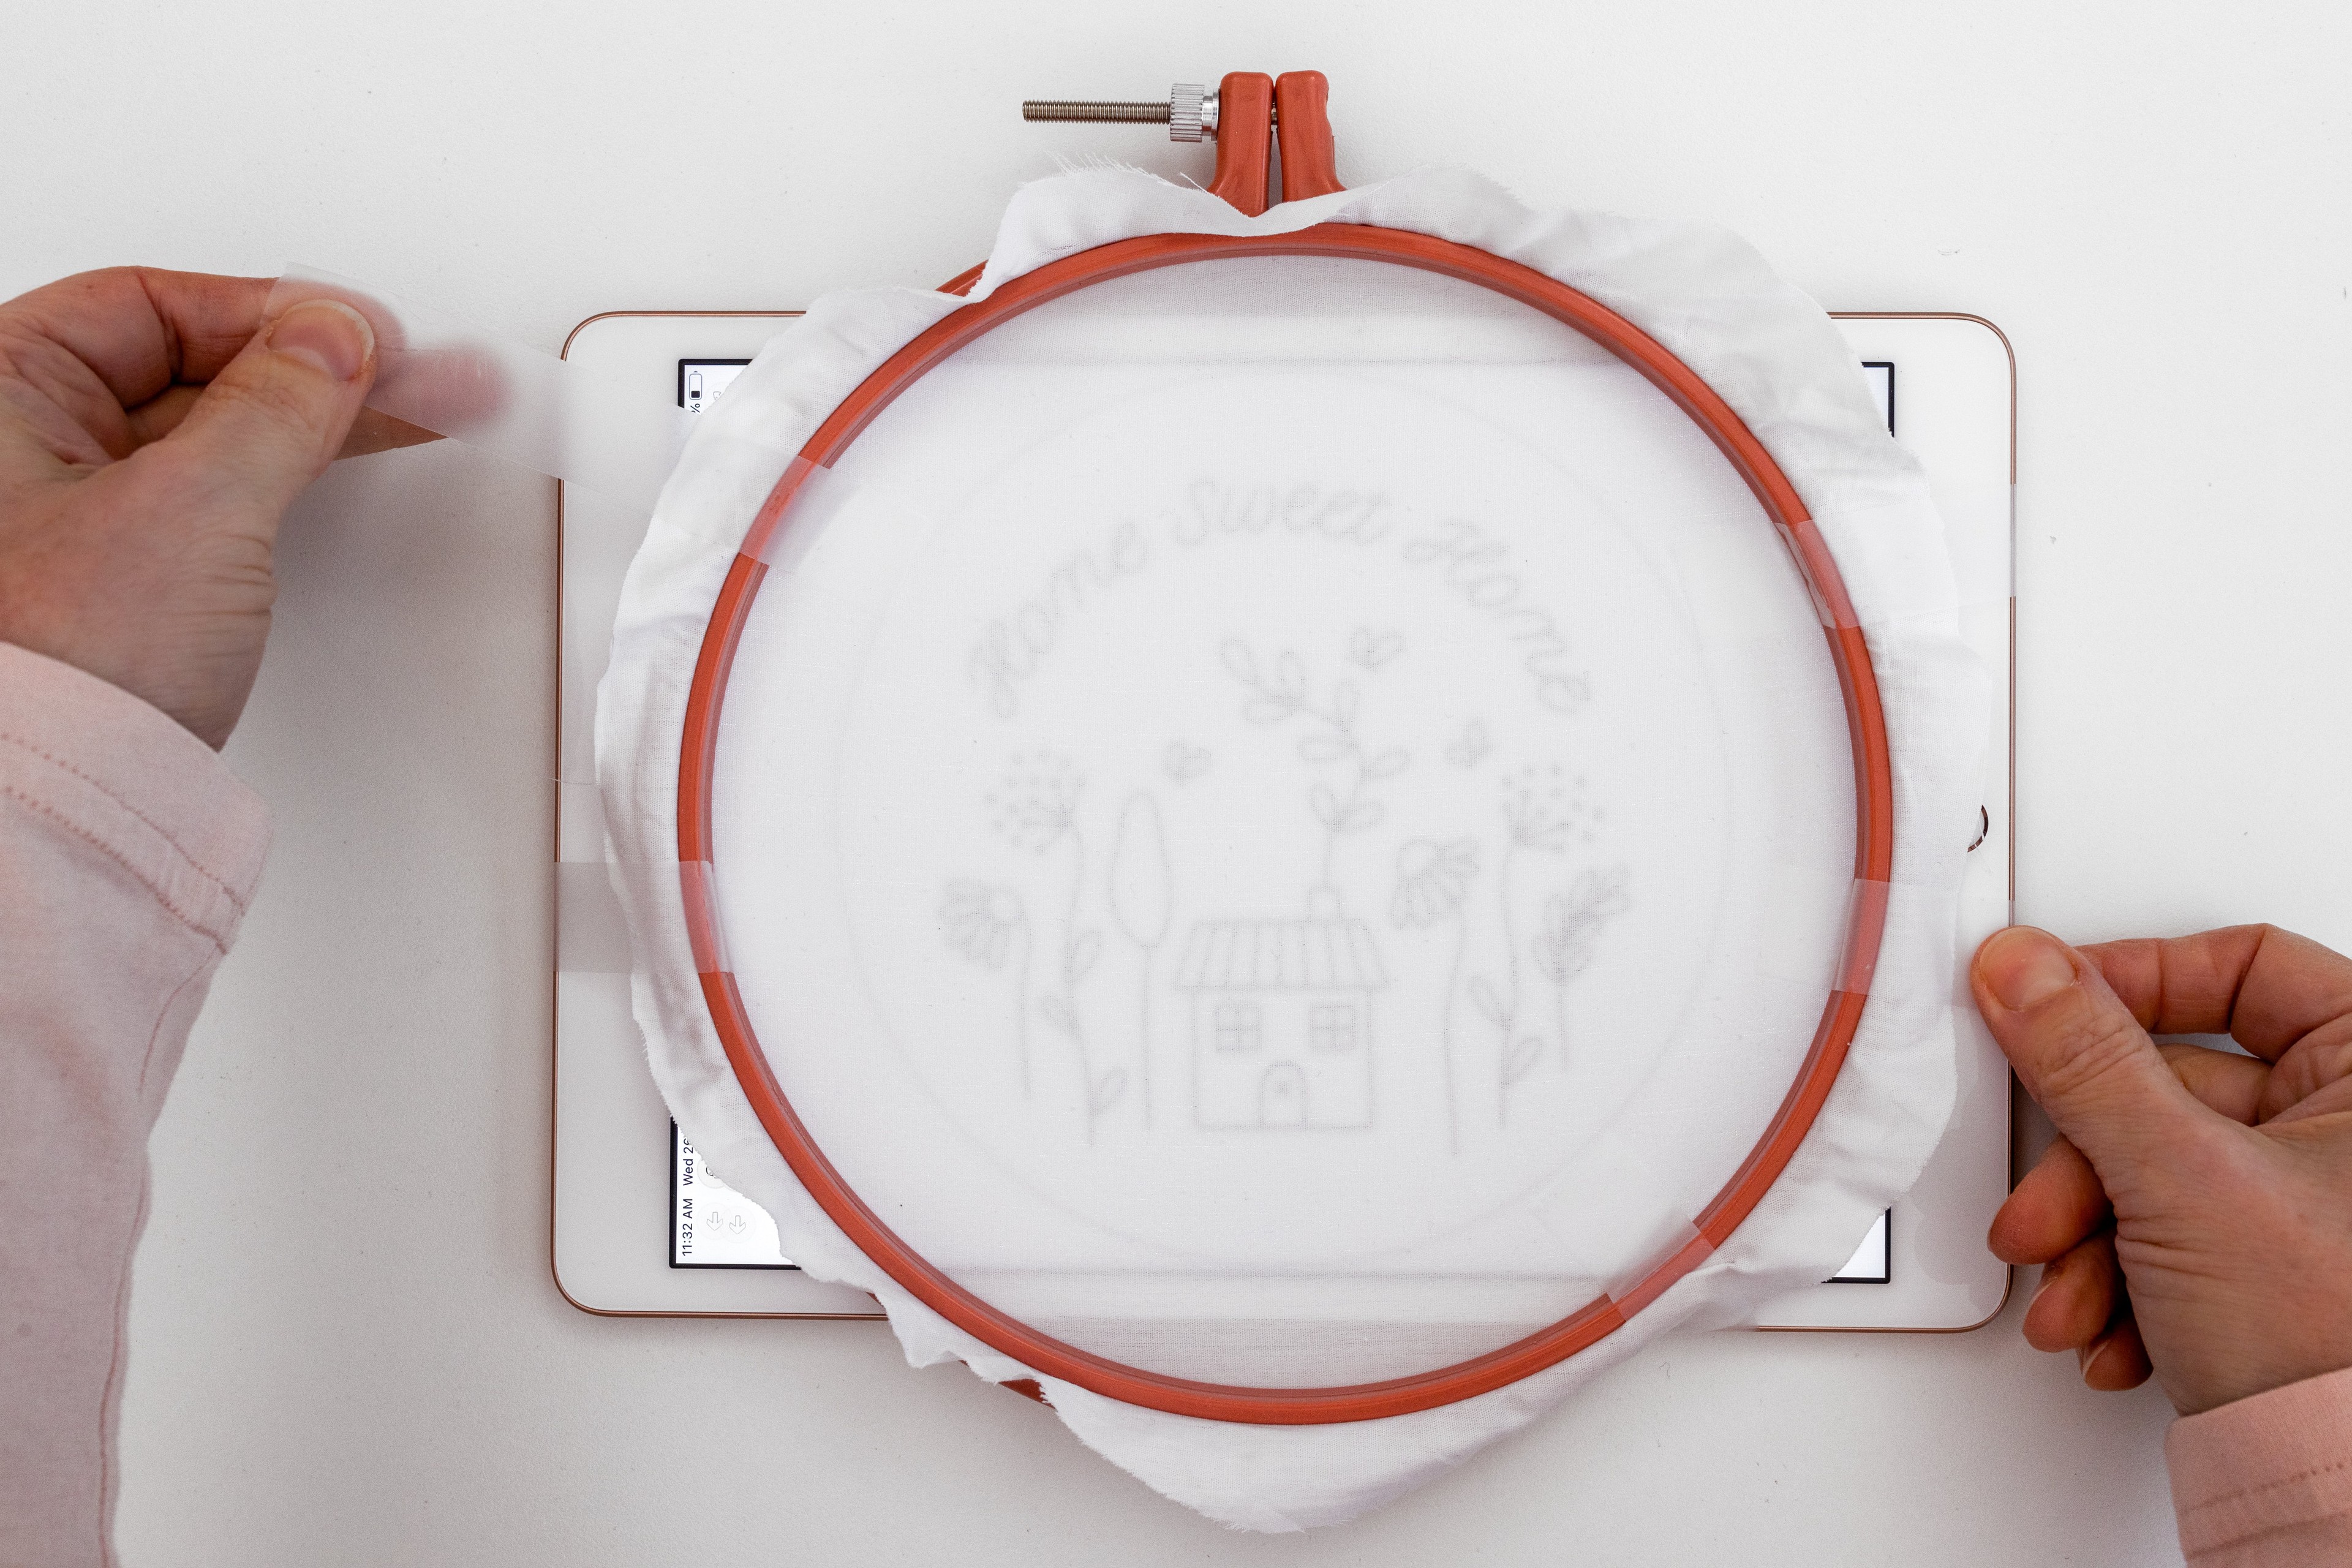 The pattern is cellotaped to the back of the hoop, which is pressed against an Ipad.